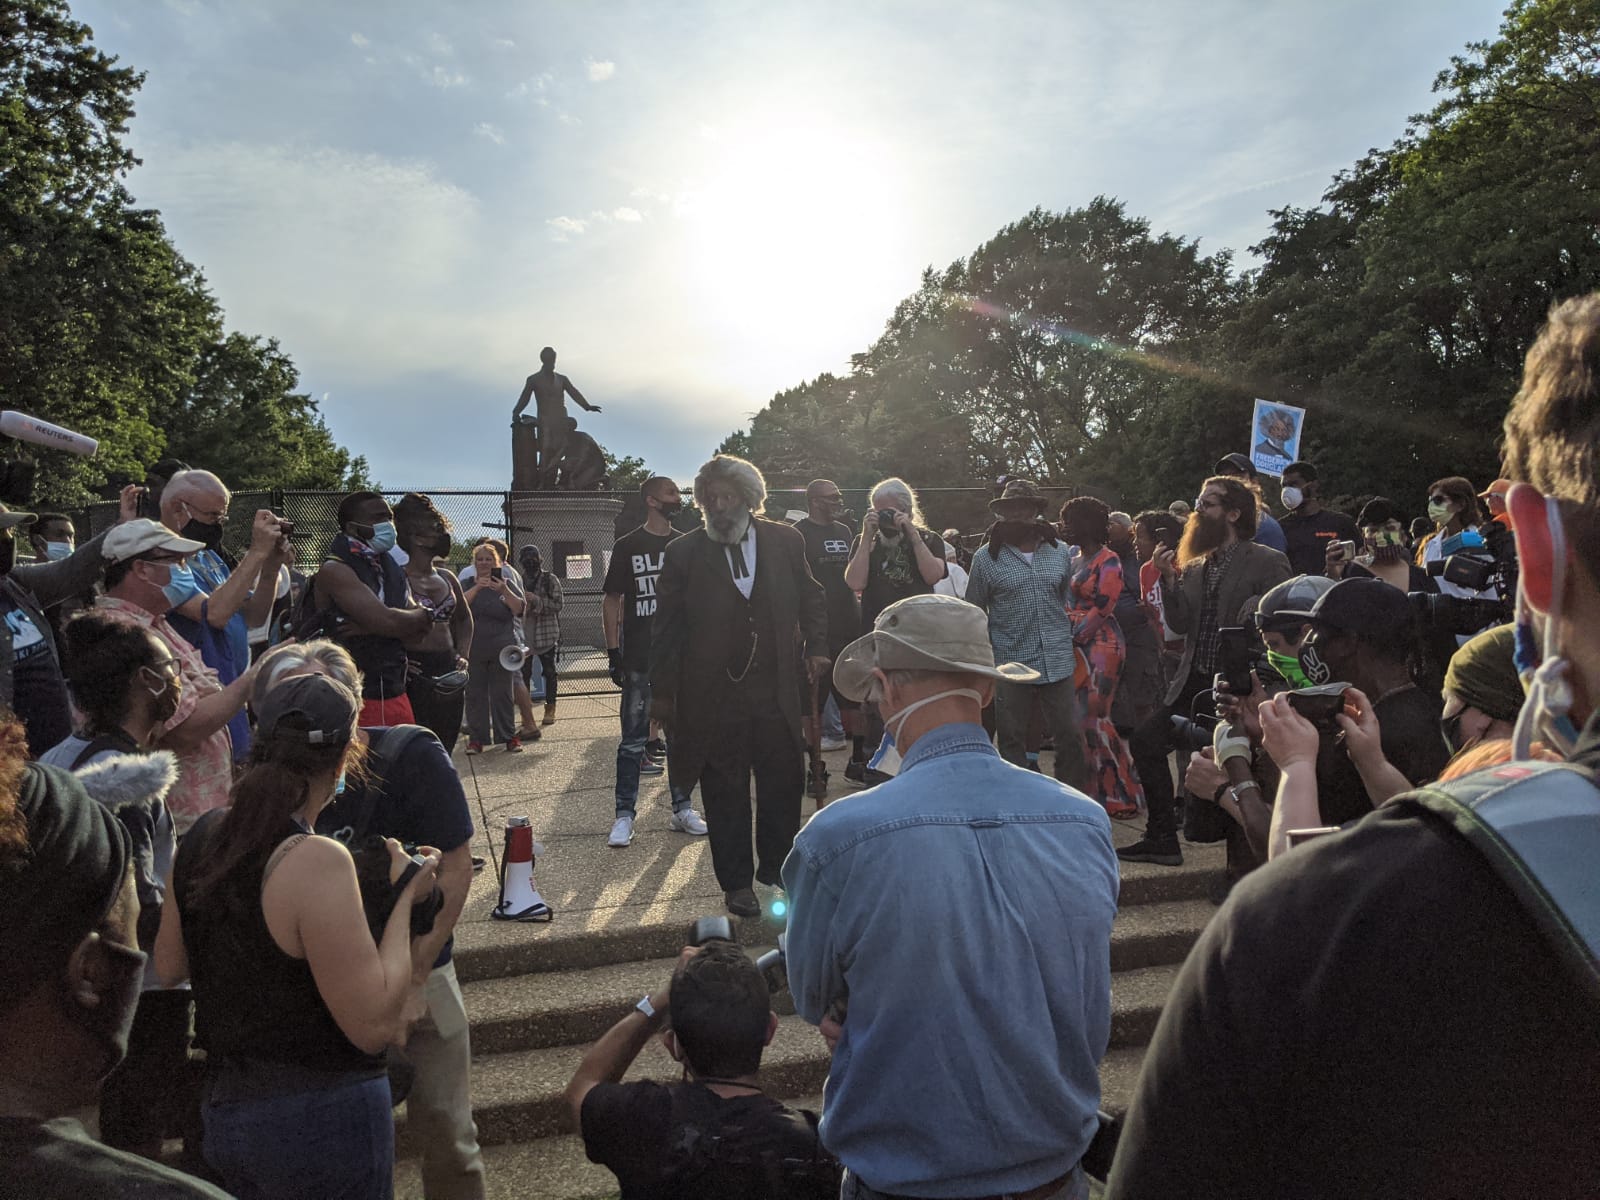 A Frederick Douglass reenactor speaking to the protesters in character. Photo by Christopher Bedford/The Federalist.